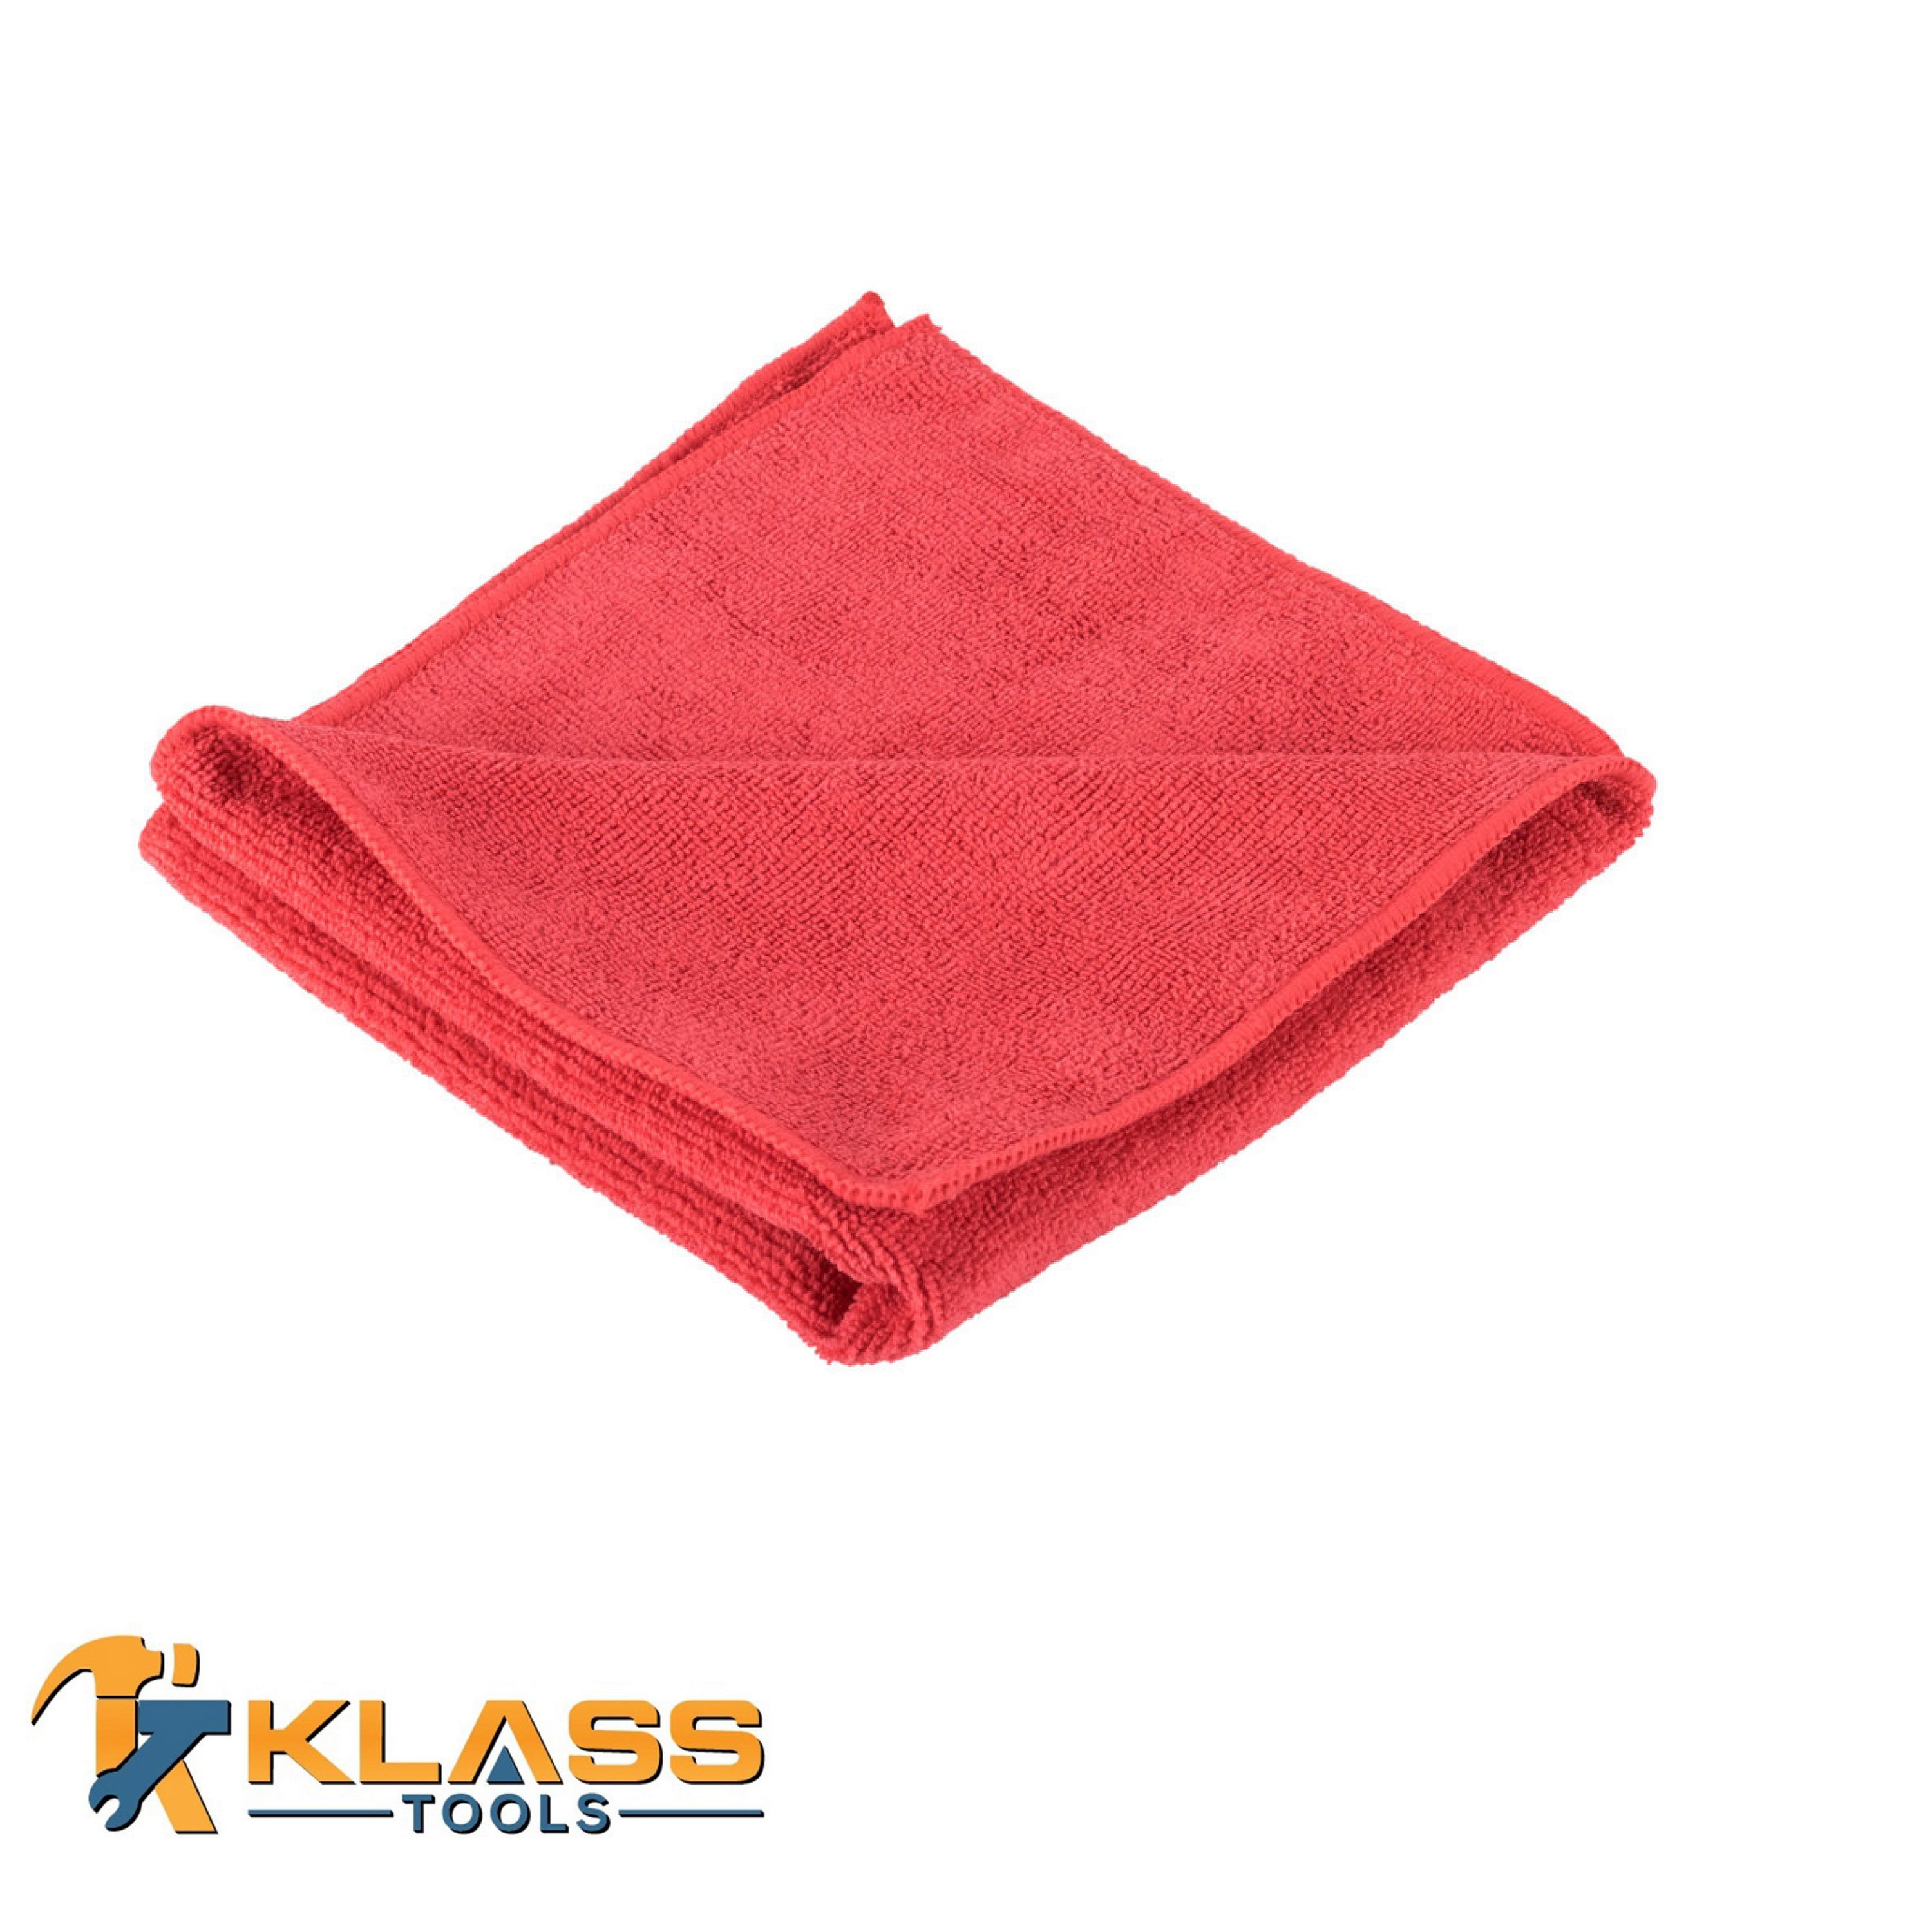 HI Visibility Green Microfiber Cleaning Cloth 